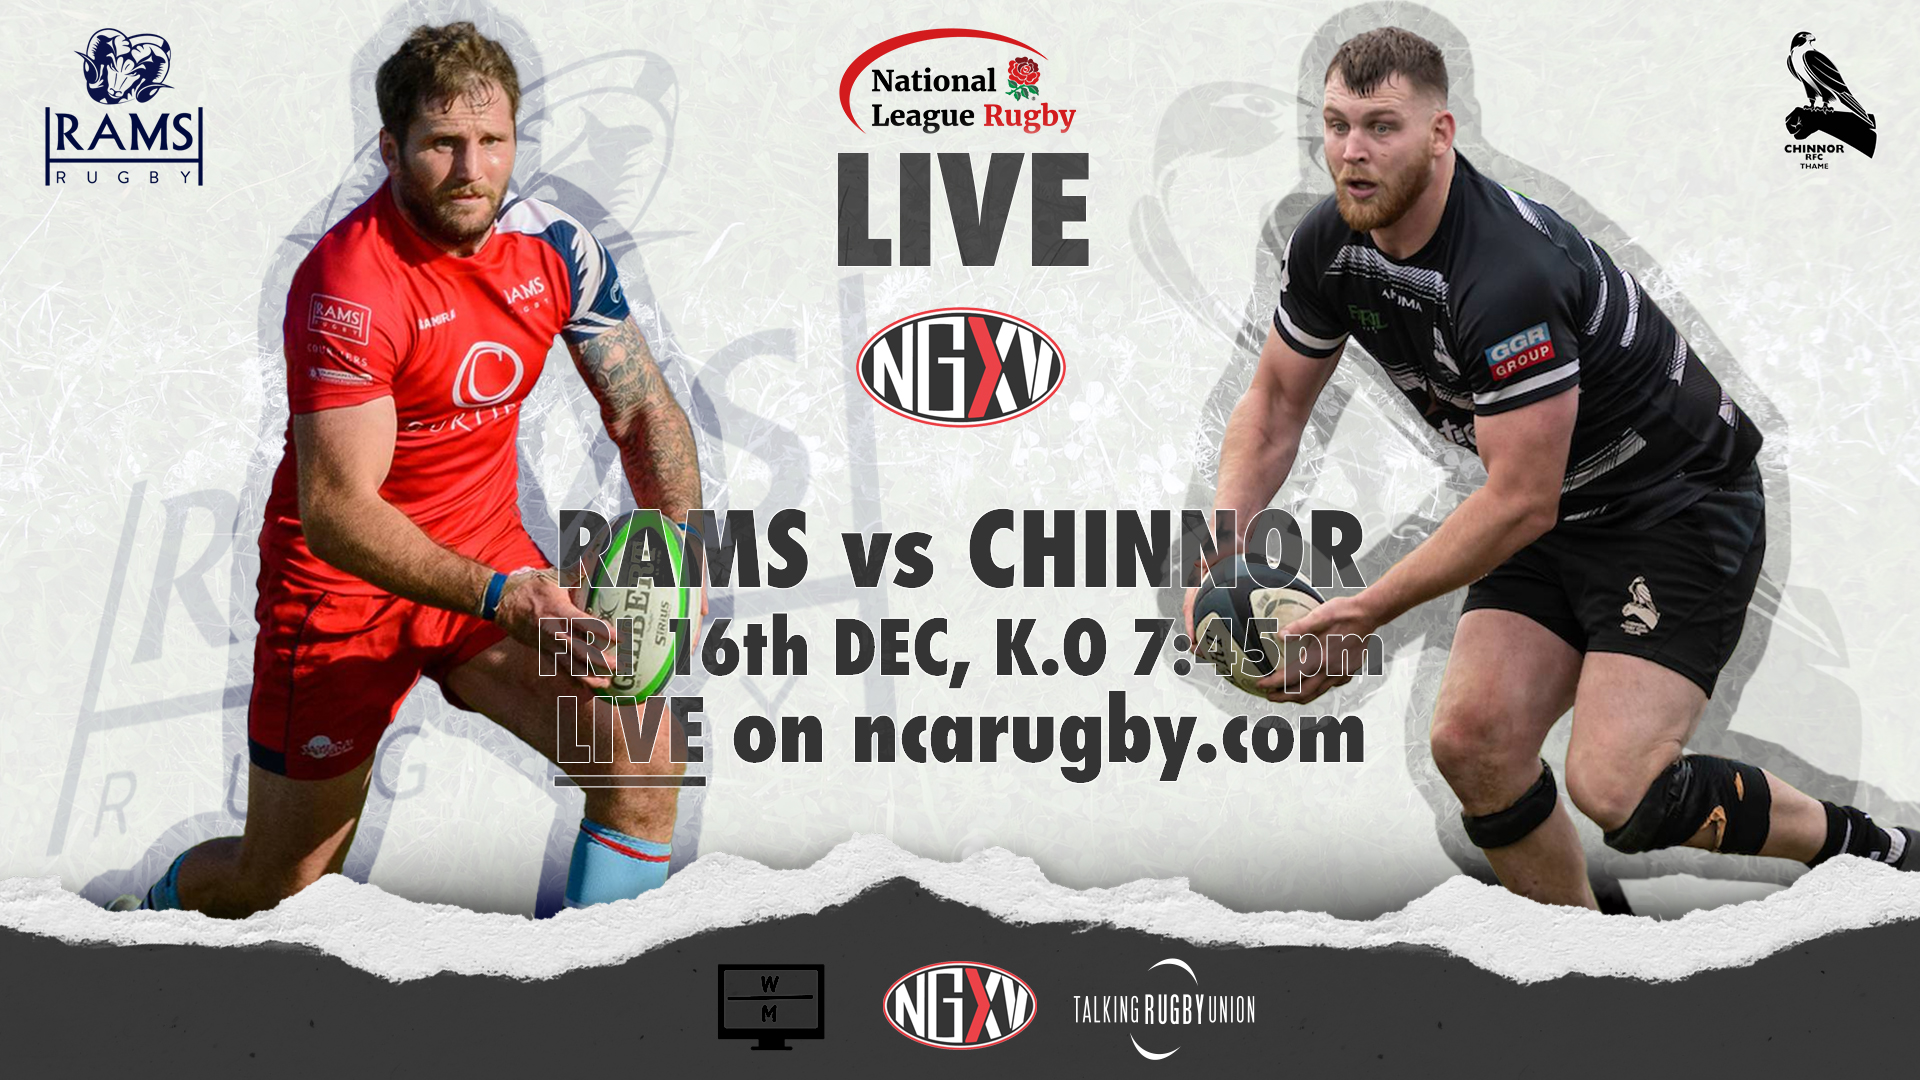 National League Rugby to live stream Rams RFC vs Chinnor for second season running